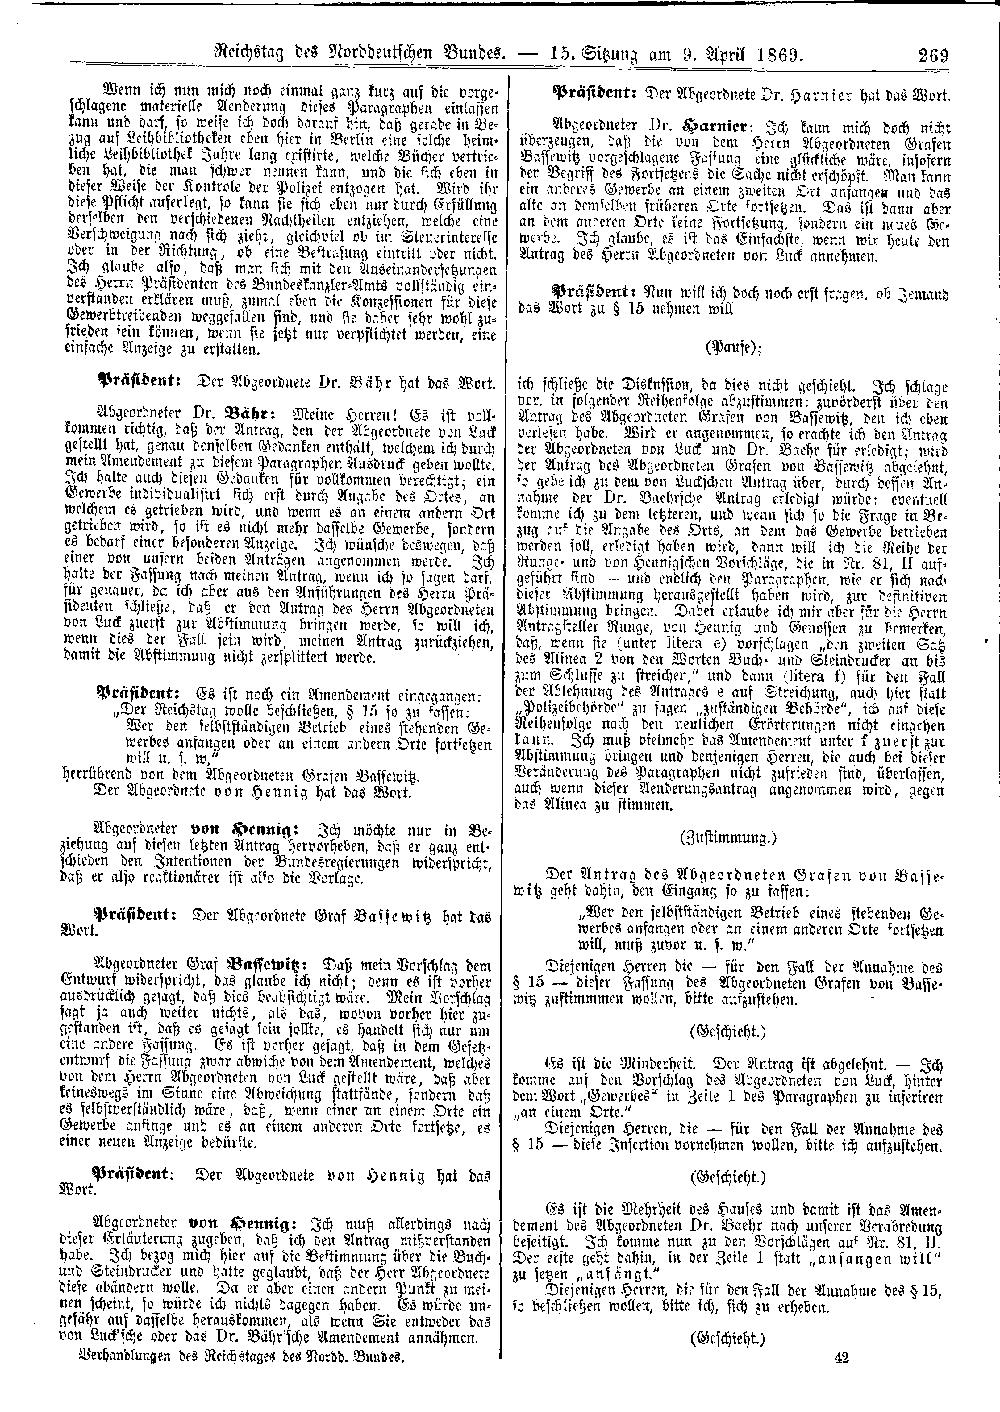 Scan of page 269